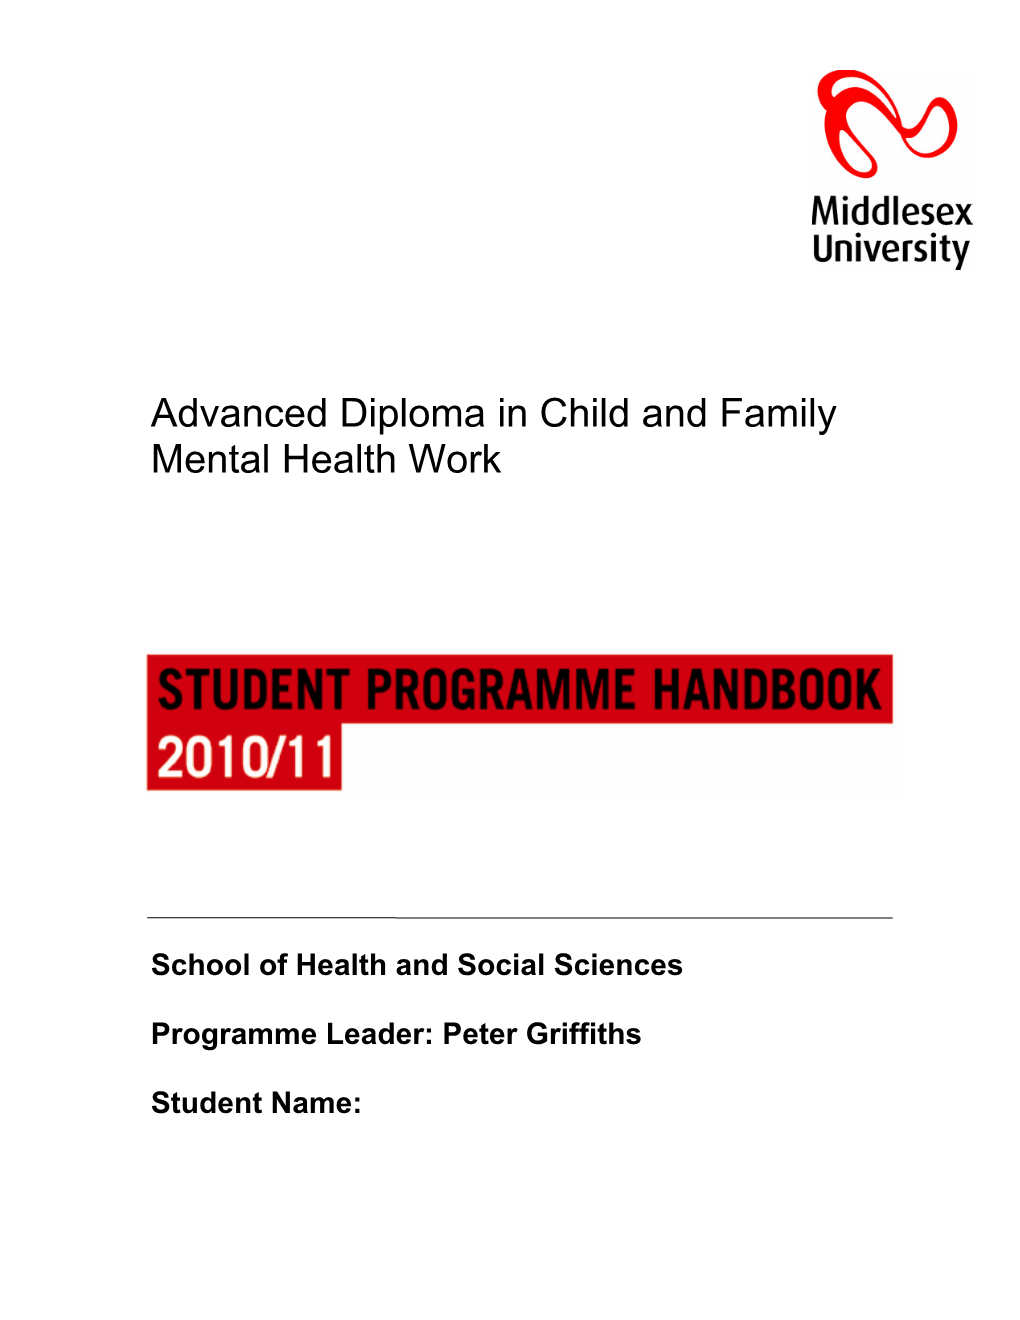 Advanced Diploma in Child and Family Mental Health Work